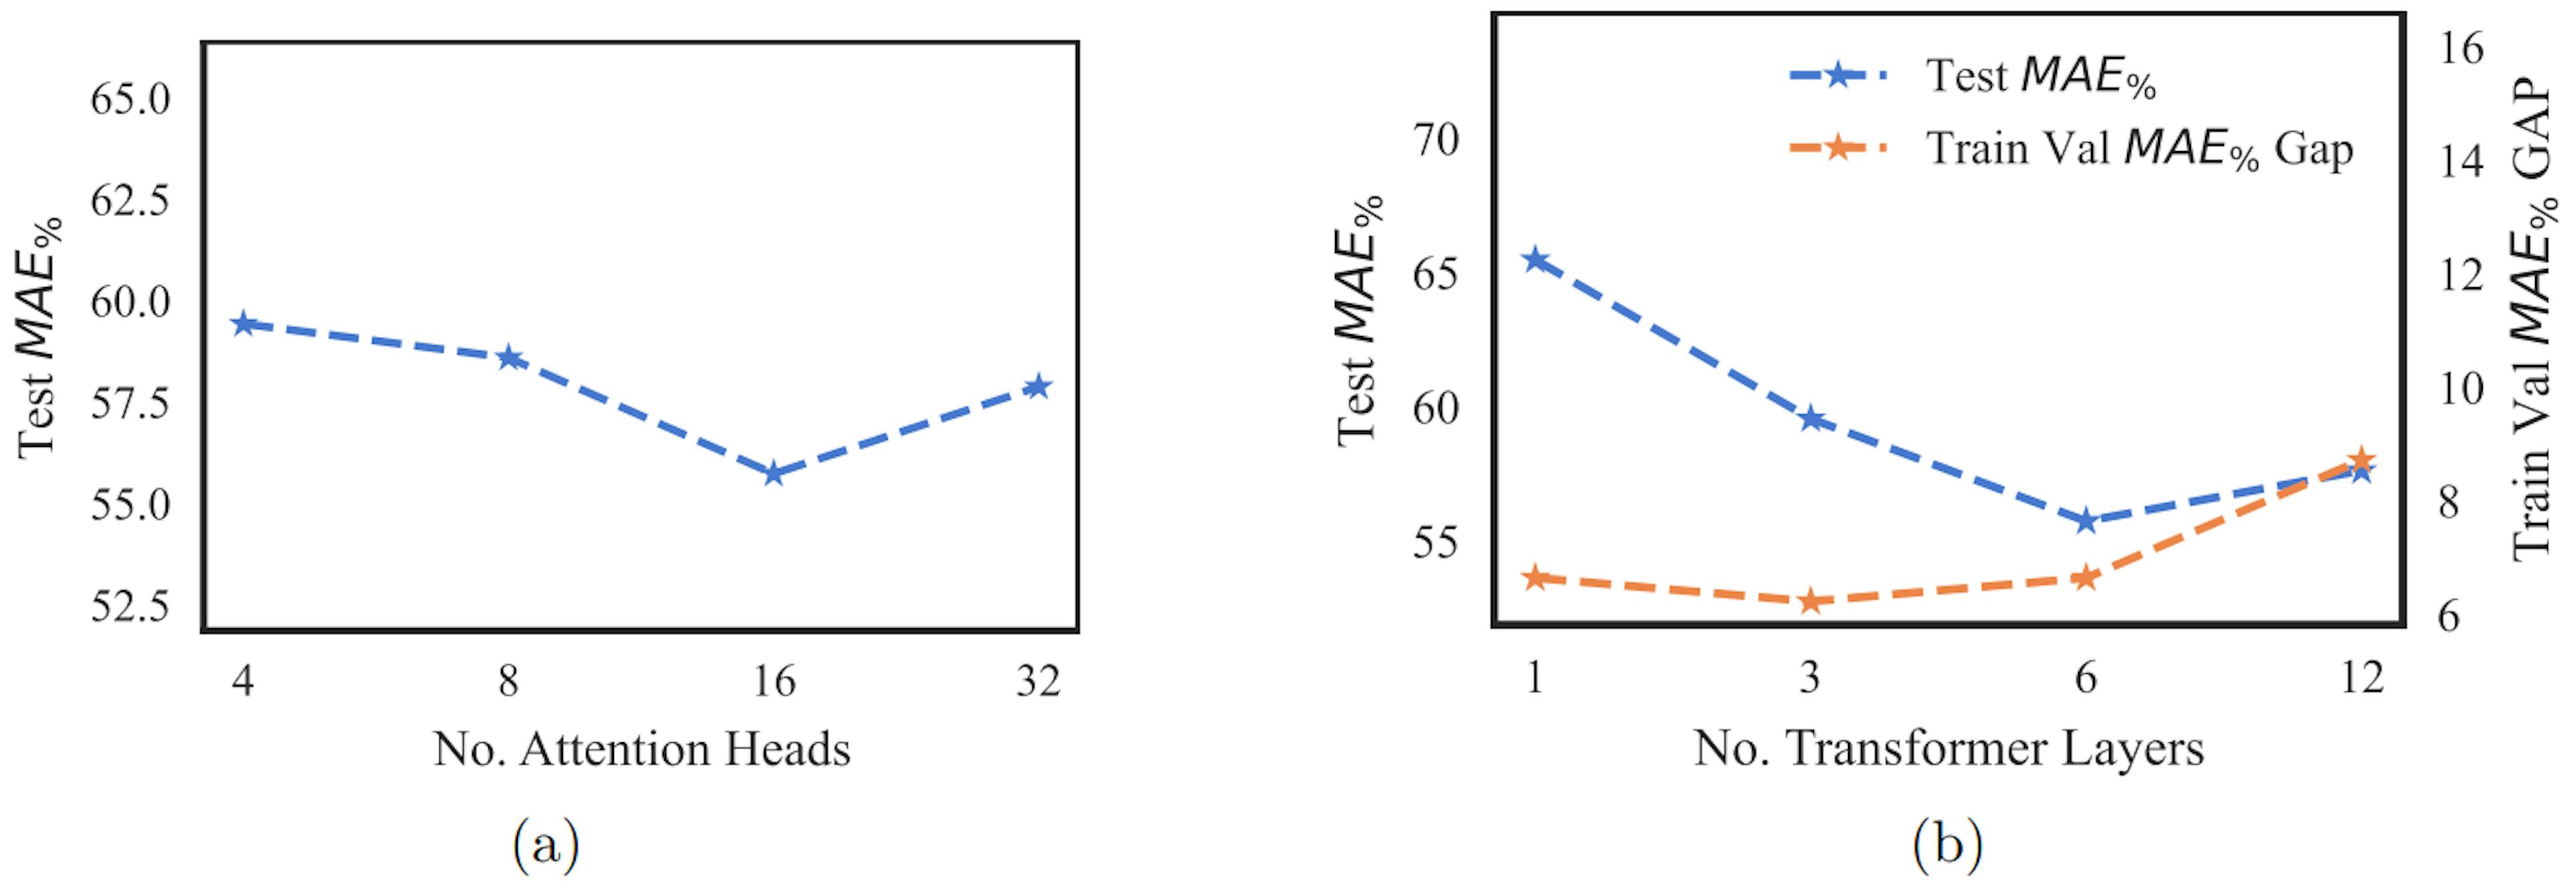 Figure 2: Figure a plots test MAE% vs number of attention heads. Figure b plots test MAE% and train-val MAE% gap vs number of transformer layers. MAE% is calculated as shown in Equation 4.